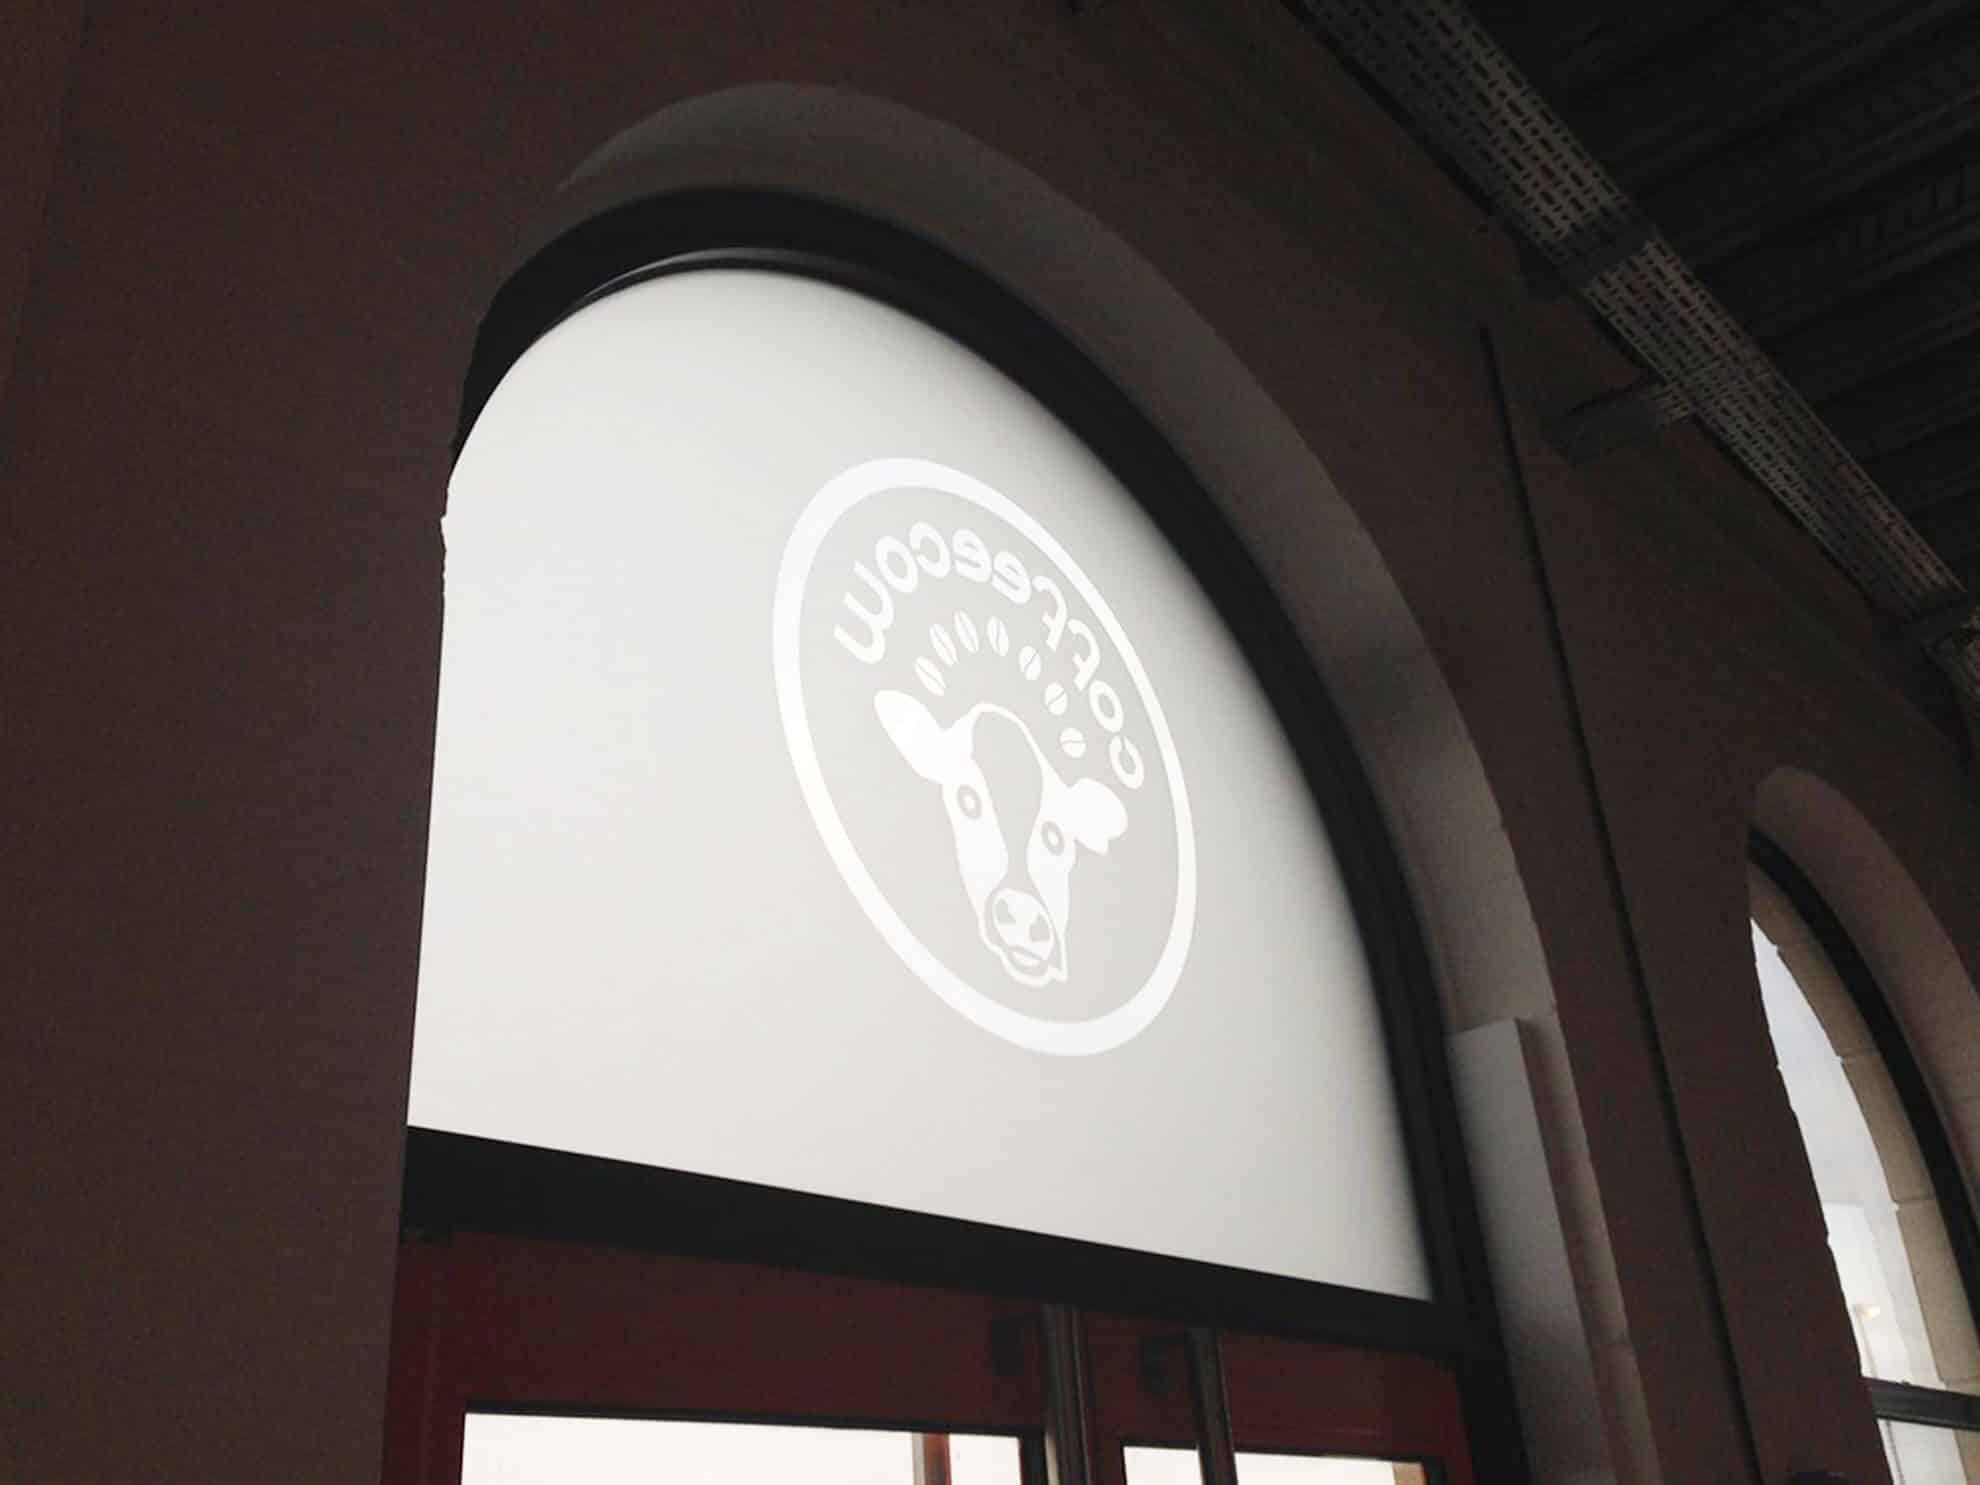 Cowshed Coffee Bar etched effect window graphics